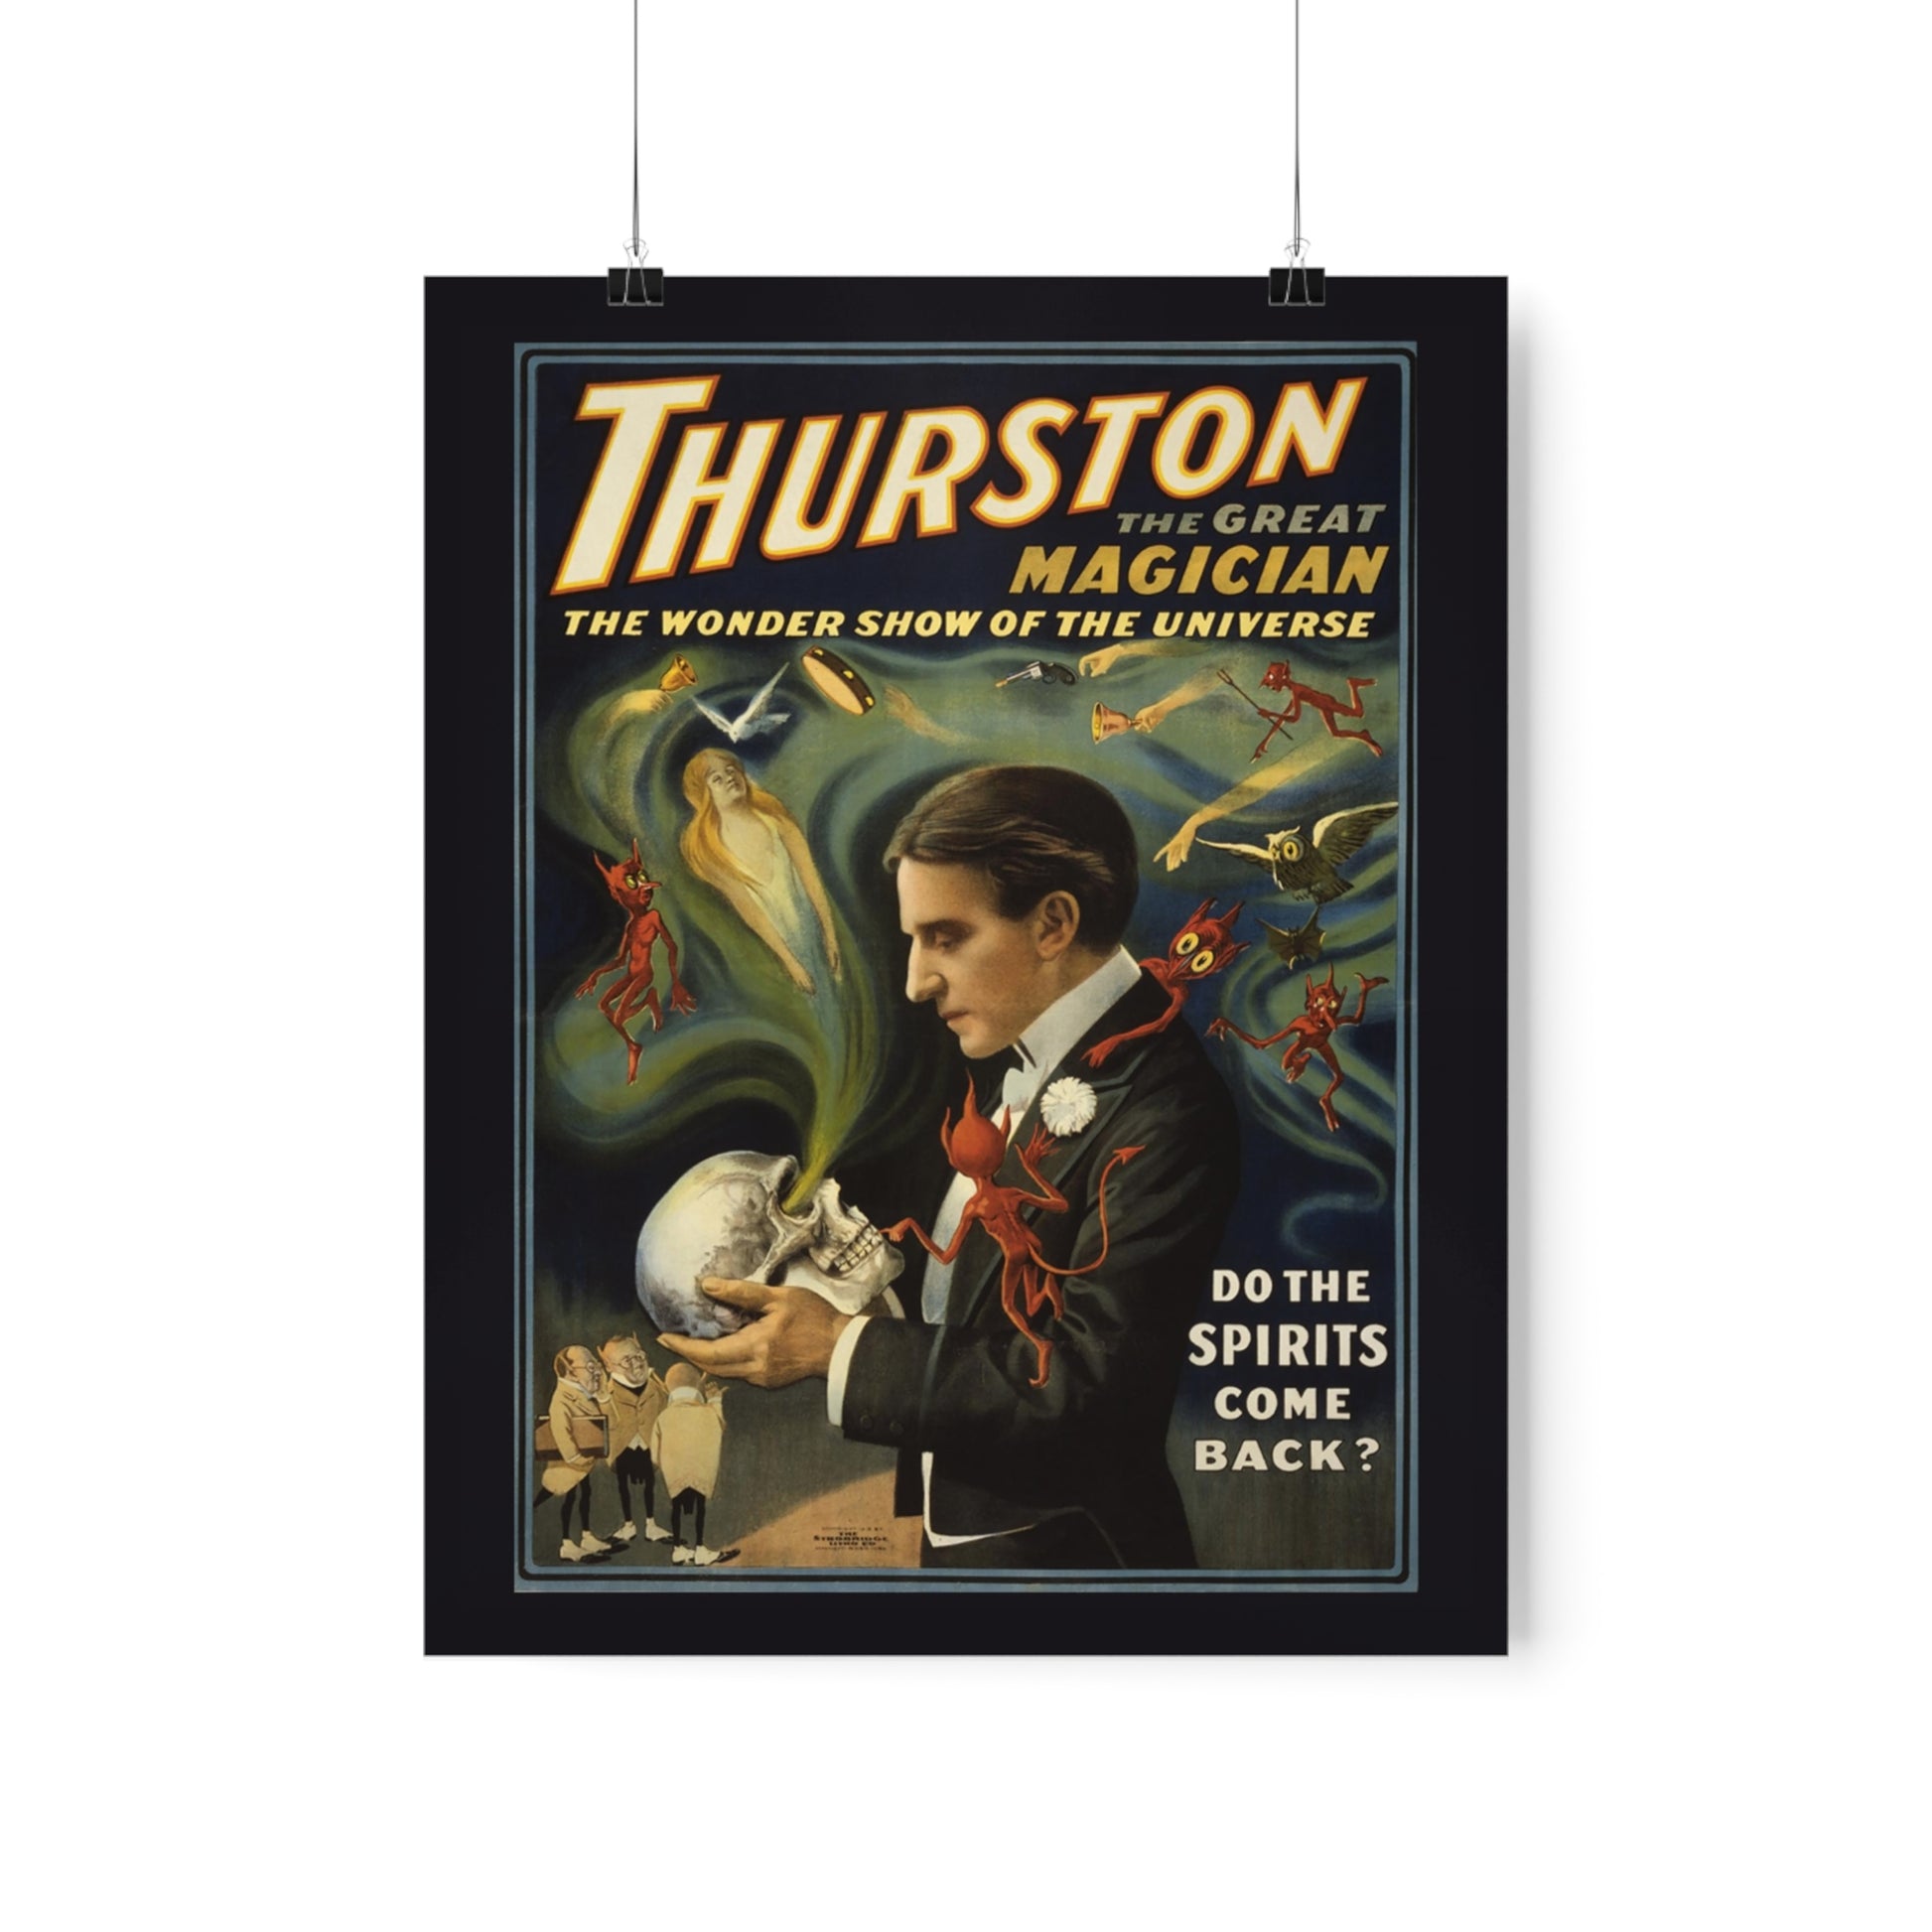 Enchanting vintage poster advertising the Vaudeville entertaining Thurston the Great Magician.